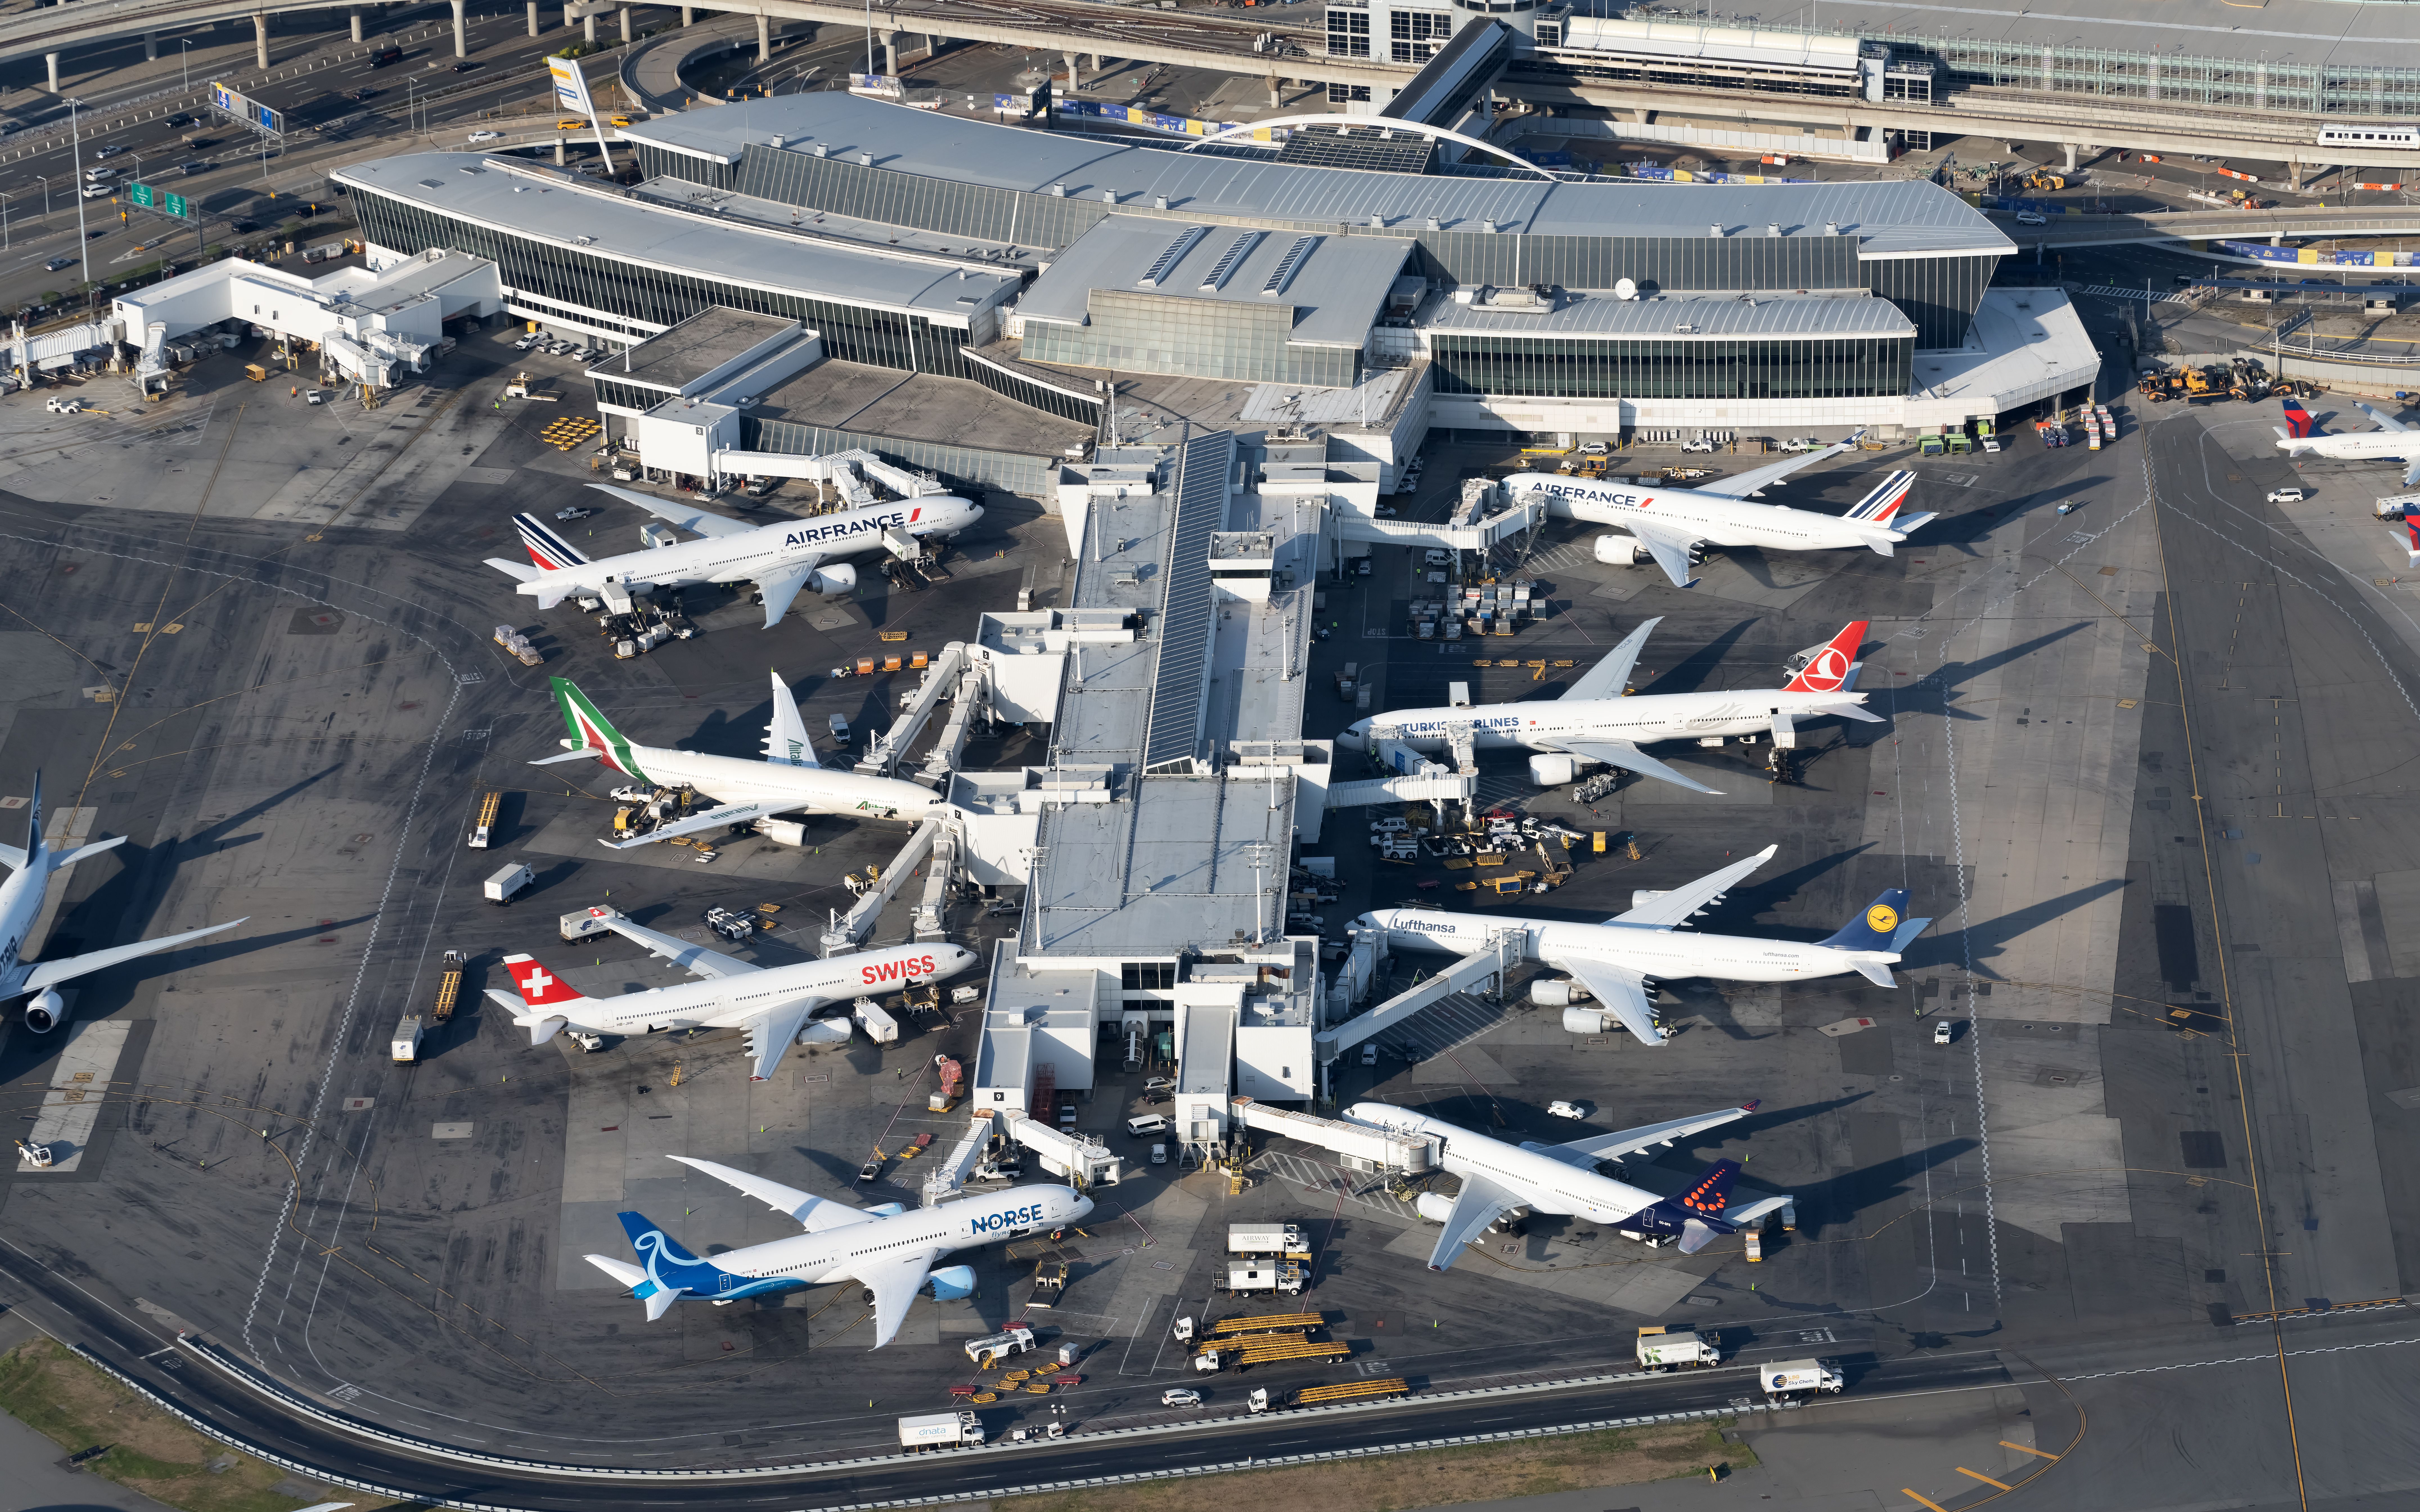 Many planes from around the world at JFK.